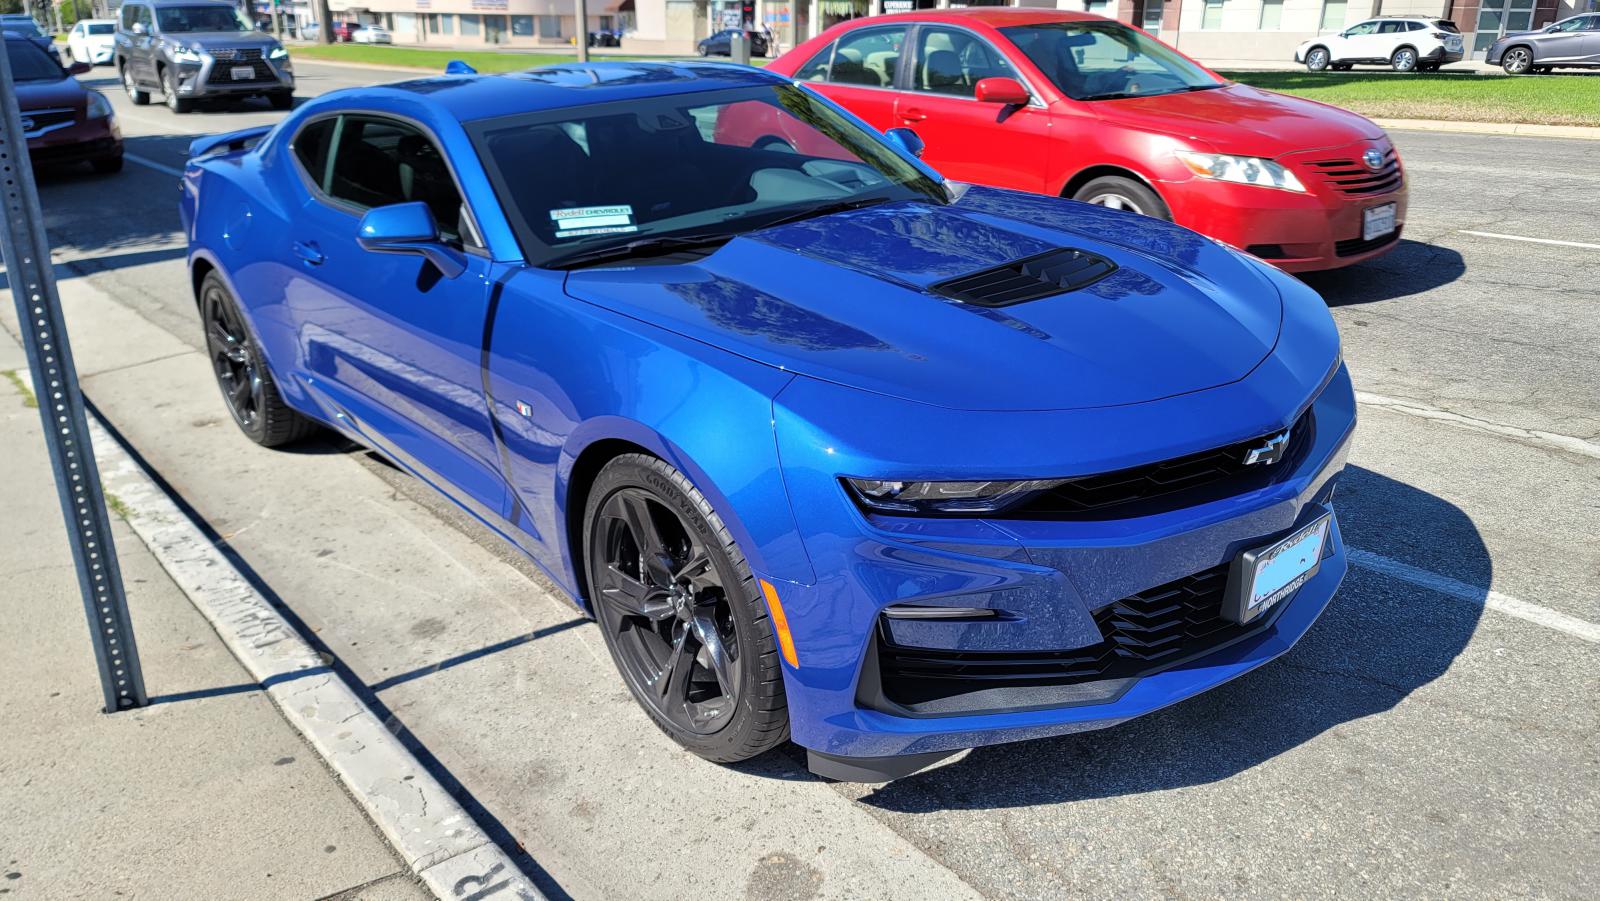 Frustrated over 2018 2.0T vibration issue at 2000 miles - CAMARO6